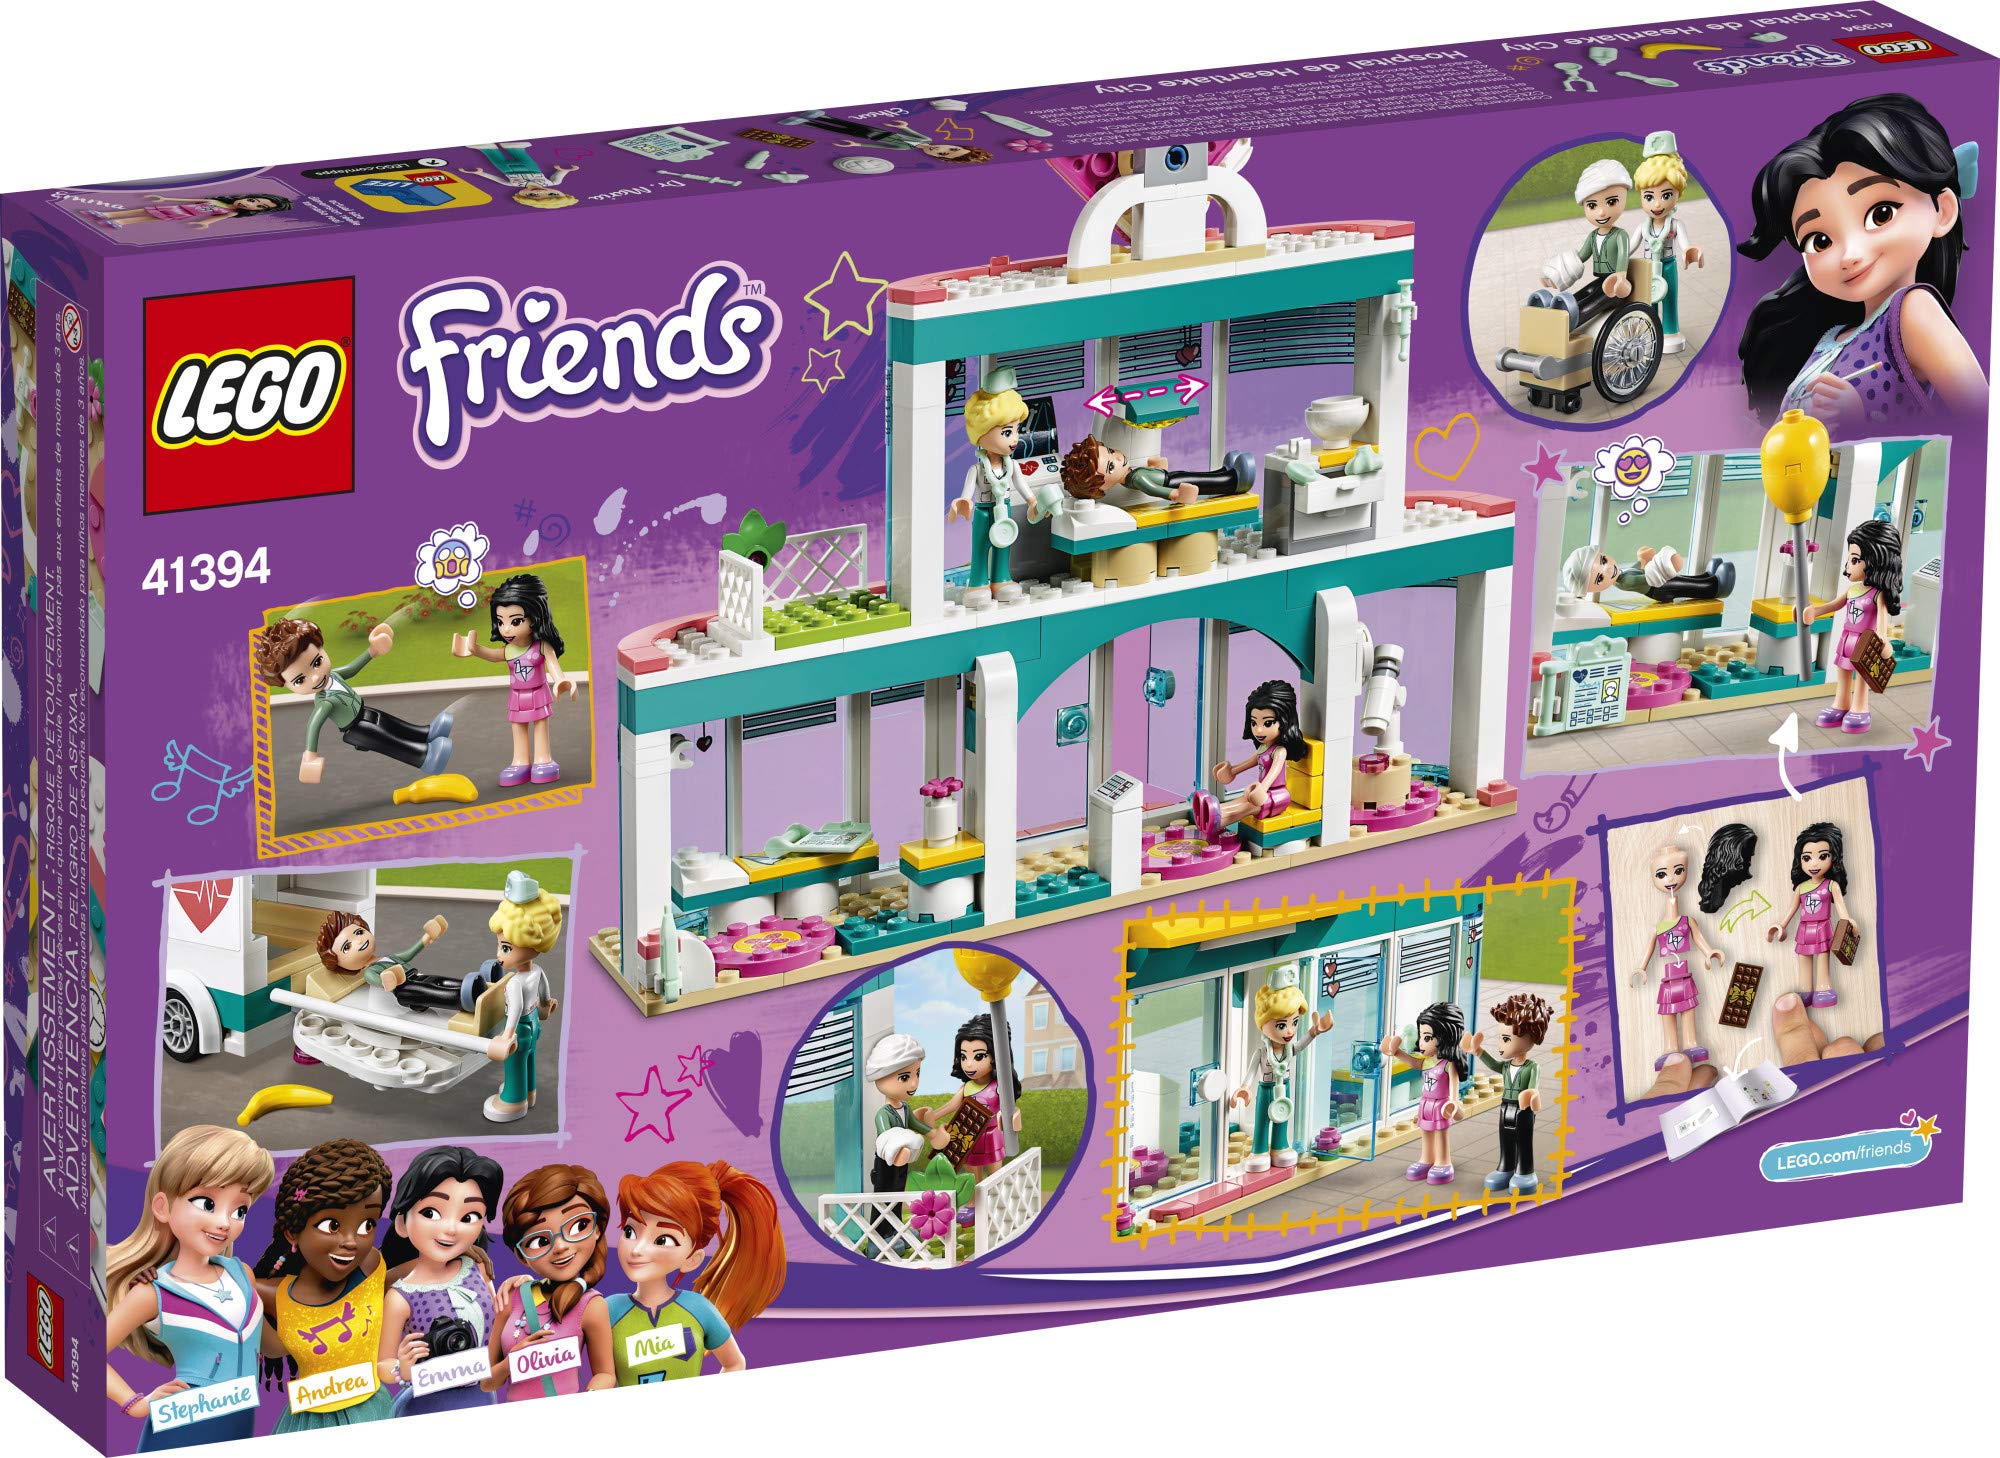 LEGO Friends Heartlake City Hospital 41394 Best Doctor Toy Building Kit, Featuring Friends Character Emma (379 Pieces)